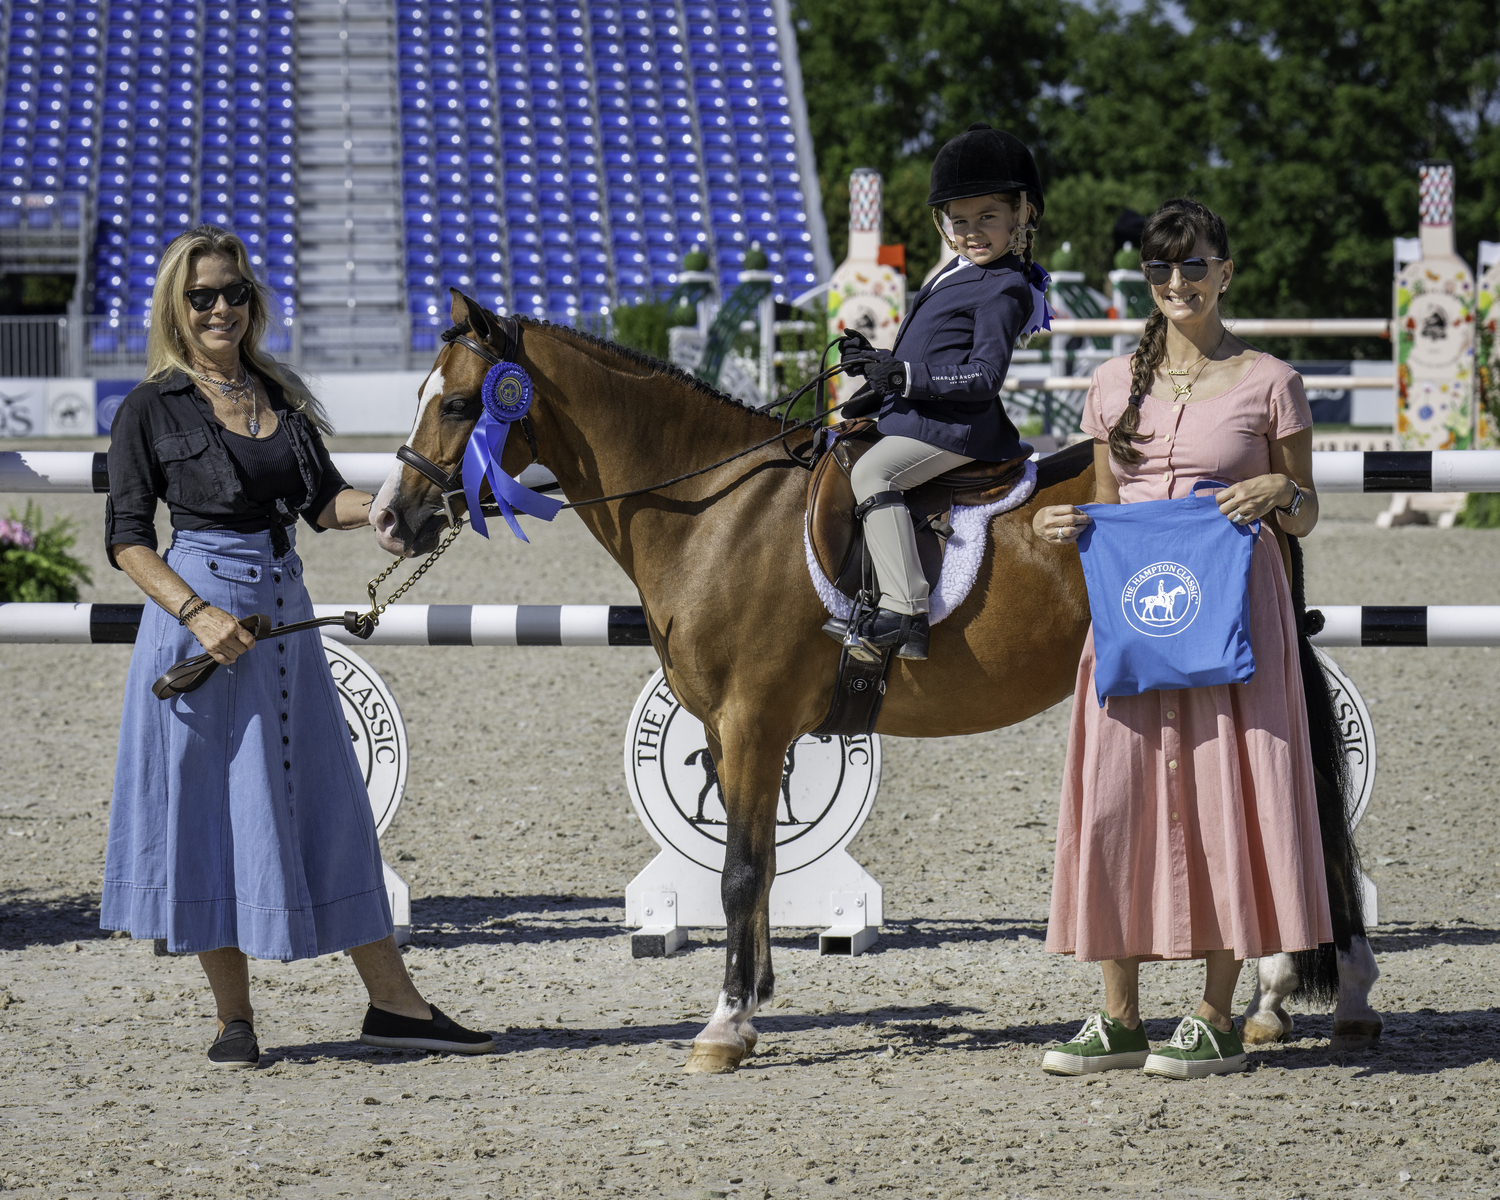 Ines Marteau was the overall winner in the leadline division on Sunday. Her mother, Brianne Goutal-Marteau, also took home a blue ribbon, winning the $10,000 Marders Local Hunter Derby. MARIANNE BARNETT